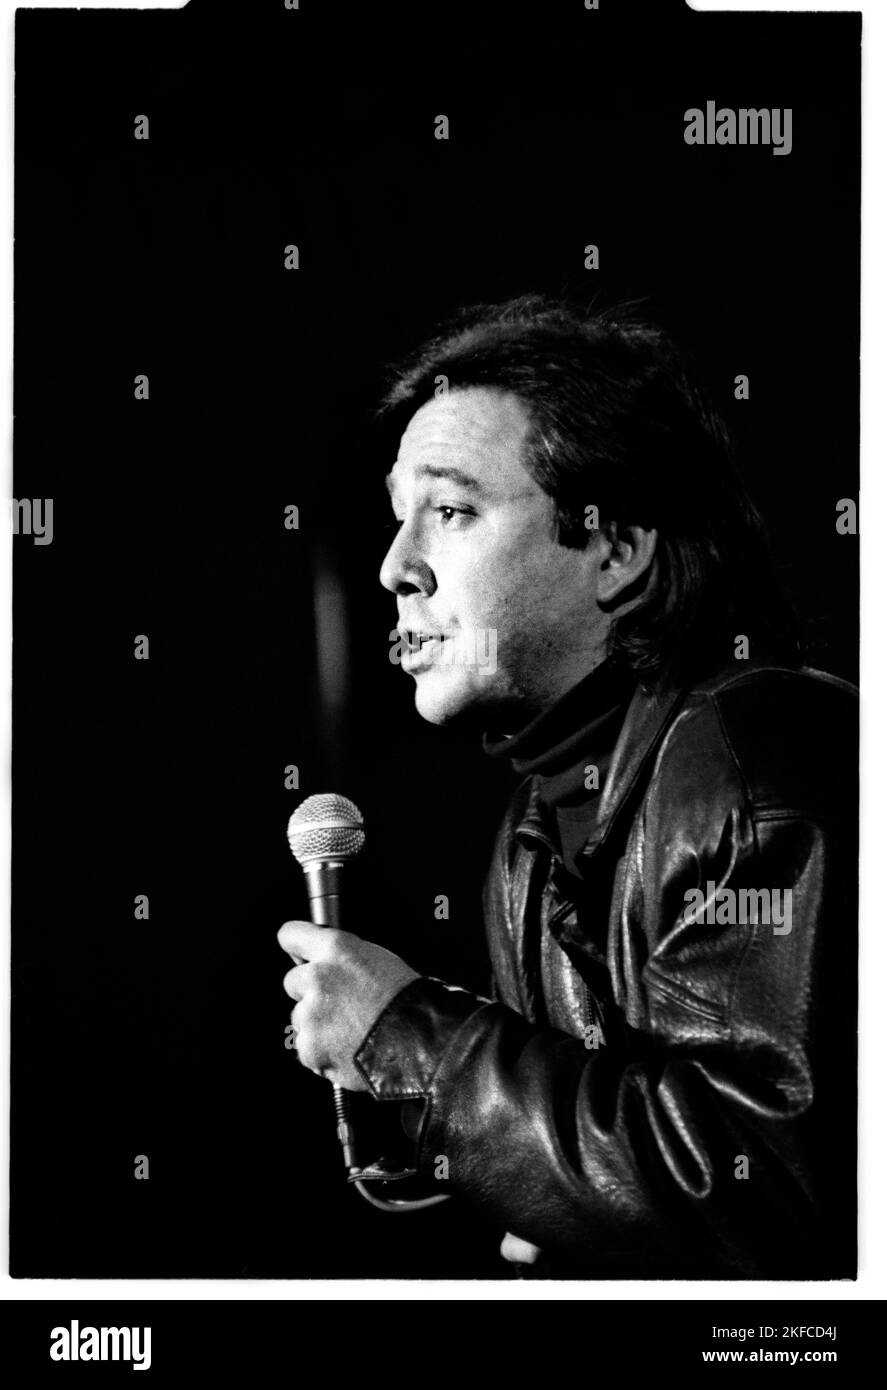 BILL HICKS, LIVE STANDUP, UK, 1992: Standup comedy legend Bill Hicks (1961-94) on his Relentless UK Tour performing live to a sellout crowd at the Great Hall, Cardiff University, Wales, UK, 17 November 1992. Photograph: ROB WATKINS.   INFO: Bill Hicks, a comedic genius of the '80s and '90s, challenged societal norms with his sharp wit and incisive social commentary. His fearless stand-up routines tackled politics, religion, and existentialism, leaving audiences both laughing and contemplating the complexities of the human experience. Stock Photo